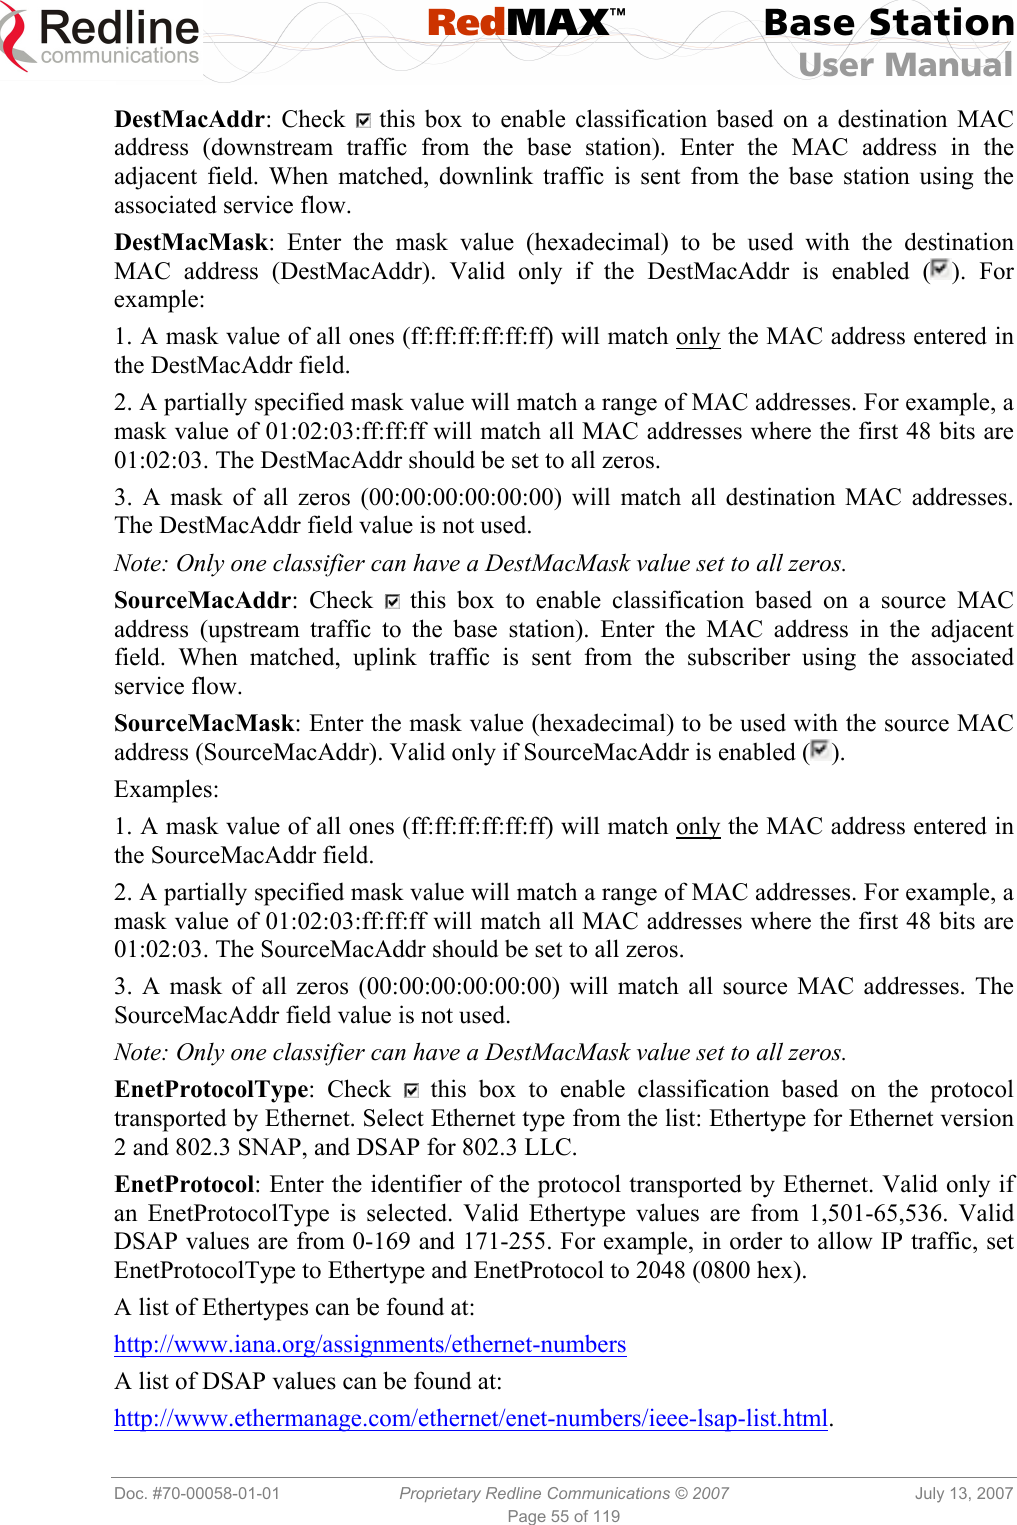  RedMAX™ Base Station User Manual   Doc. #70-00058-01-01  Proprietary Redline Communications © 2007  July 13, 2007 Page 55 of 119 DestMacAddr: Check   this box to enable classification based on a destination MAC address (downstream traffic from the base station). Enter the MAC address in the adjacent field. When matched, downlink traffic is sent from the base station using the associated service flow. DestMacMask: Enter the mask value (hexadecimal) to be used with the destination MAC address (DestMacAddr). Valid only if the DestMacAddr is enabled ( ). For example: 1. A mask value of all ones (ff:ff:ff:ff:ff:ff) will match only the MAC address entered in the DestMacAddr field.  2. A partially specified mask value will match a range of MAC addresses. For example, a mask value of 01:02:03:ff:ff:ff will match all MAC addresses where the first 48 bits are 01:02:03. The DestMacAddr should be set to all zeros. 3. A mask of all zeros (00:00:00:00:00:00) will match all destination MAC addresses. The DestMacAddr field value is not used.  Note: Only one classifier can have a DestMacMask value set to all zeros. SourceMacAddr: Check   this box to enable classification based on a source MAC address (upstream traffic to the base station). Enter the MAC address in the adjacent field. When matched, uplink traffic is sent from the subscriber using the associated service flow. SourceMacMask: Enter the mask value (hexadecimal) to be used with the source MAC address (SourceMacAddr). Valid only if SourceMacAddr is enabled ( ). Examples: 1. A mask value of all ones (ff:ff:ff:ff:ff:ff) will match only the MAC address entered in the SourceMacAddr field.  2. A partially specified mask value will match a range of MAC addresses. For example, a mask value of 01:02:03:ff:ff:ff will match all MAC addresses where the first 48 bits are 01:02:03. The SourceMacAddr should be set to all zeros. 3. A mask of all zeros (00:00:00:00:00:00) will match all source MAC addresses. The SourceMacAddr field value is not used.  Note: Only one classifier can have a DestMacMask value set to all zeros. EnetProtocolType: Check   this box to enable classification based on the protocol transported by Ethernet. Select Ethernet type from the list: Ethertype for Ethernet version 2 and 802.3 SNAP, and DSAP for 802.3 LLC. EnetProtocol: Enter the identifier of the protocol transported by Ethernet. Valid only if an EnetProtocolType is selected. Valid Ethertype values are from 1,501-65,536. Valid DSAP values are from 0-169 and 171-255. For example, in order to allow IP traffic, set EnetProtocolType to Ethertype and EnetProtocol to 2048 (0800 hex). A list of Ethertypes can be found at: http://www.iana.org/assignments/ethernet-numbers A list of DSAP values can be found at: http://www.ethermanage.com/ethernet/enet-numbers/ieee-lsap-list.html. 